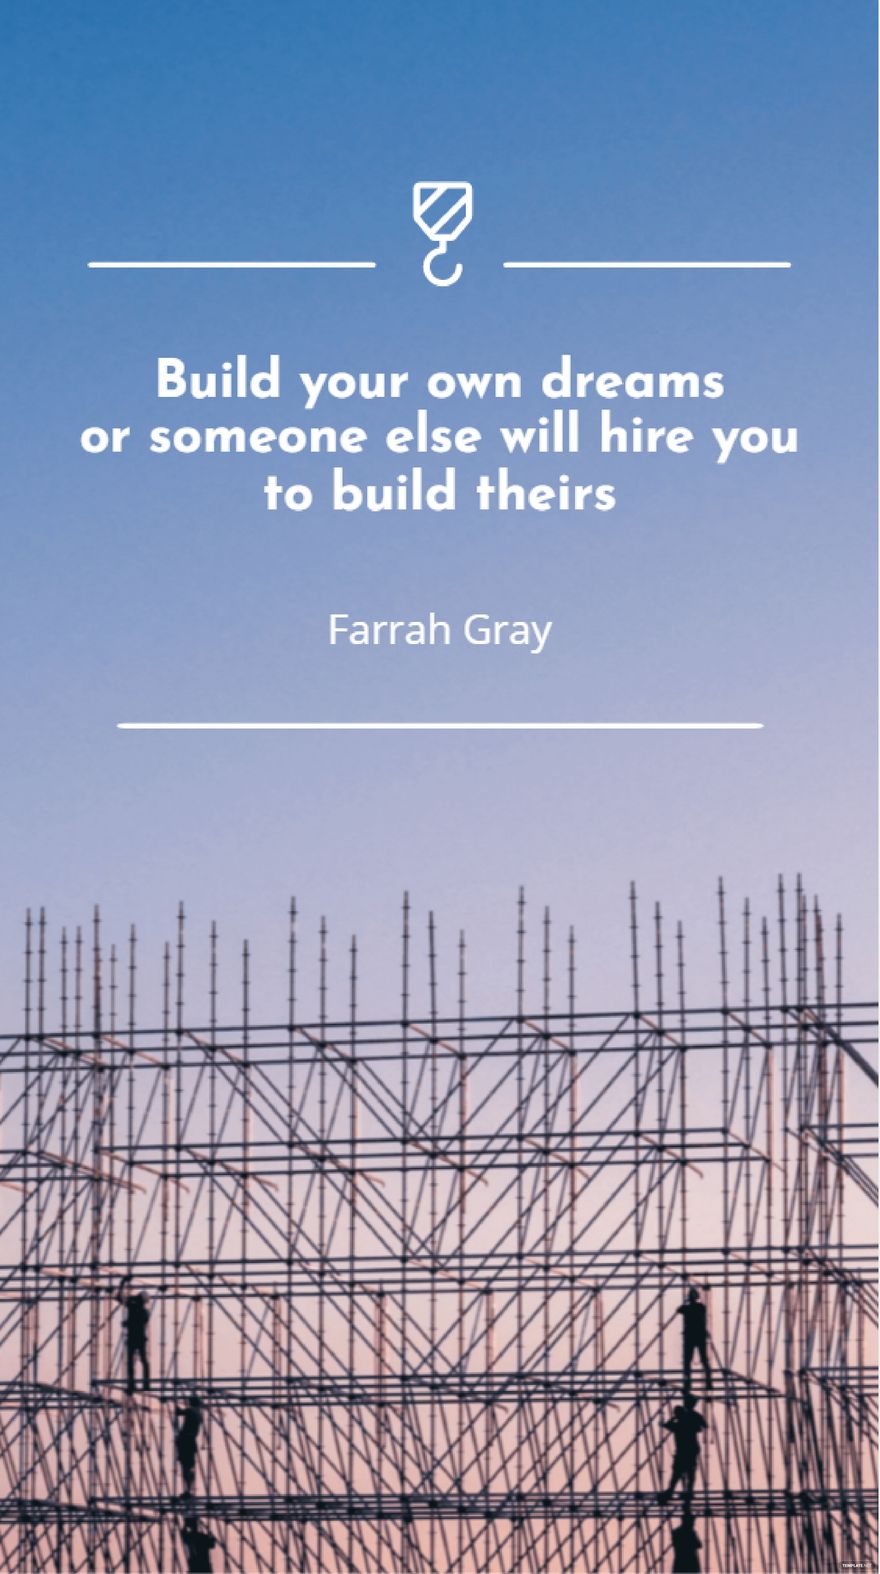 Farrah Gray - Build your own dreams or someone else will hire you to build theirs.